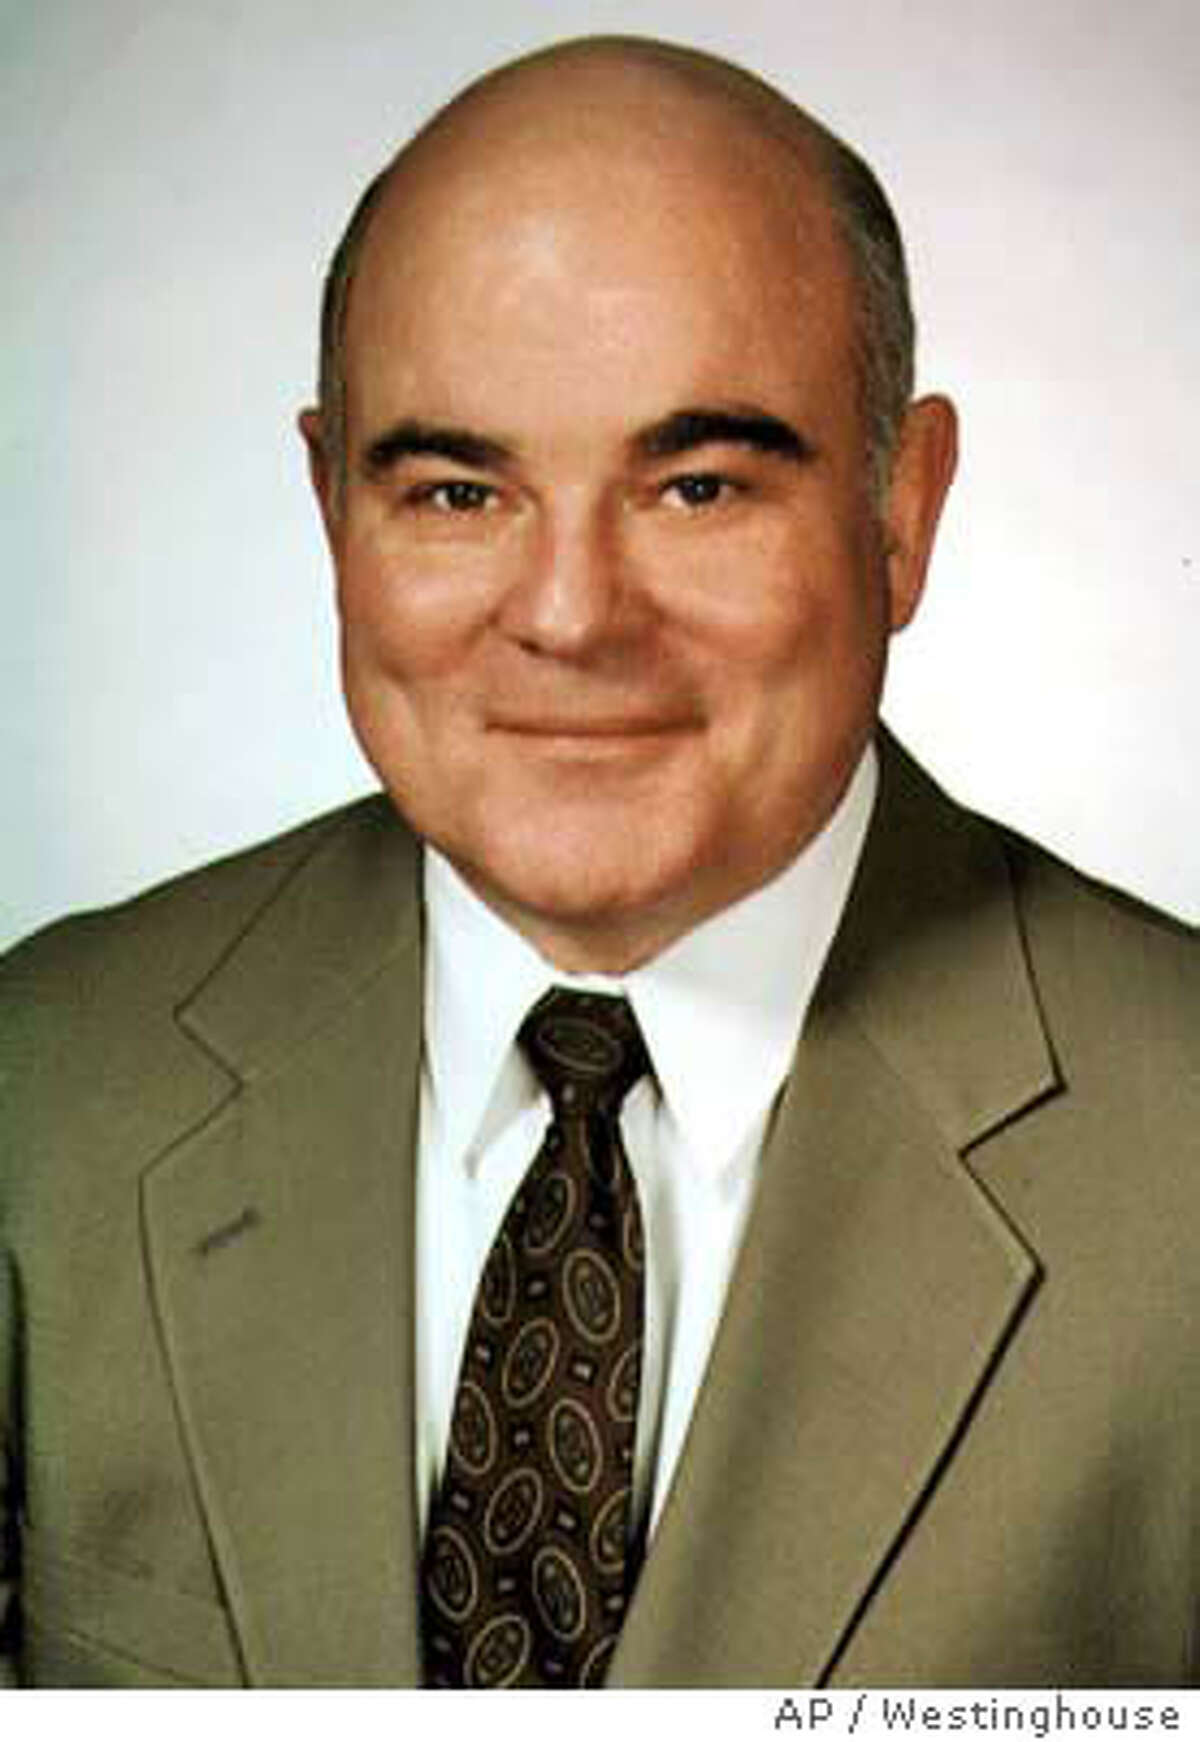 ** FILE ** Undated file photo of former Westinghouse executive Francis J. Harvey who was nominated by President Bush to become Army secretary. Harvey would replace Thomas E. White, who resigned under pressure last year after repeated clashes with Defense Secretary Donald H. Rumsfeld. (AP Photo/Westighouse)